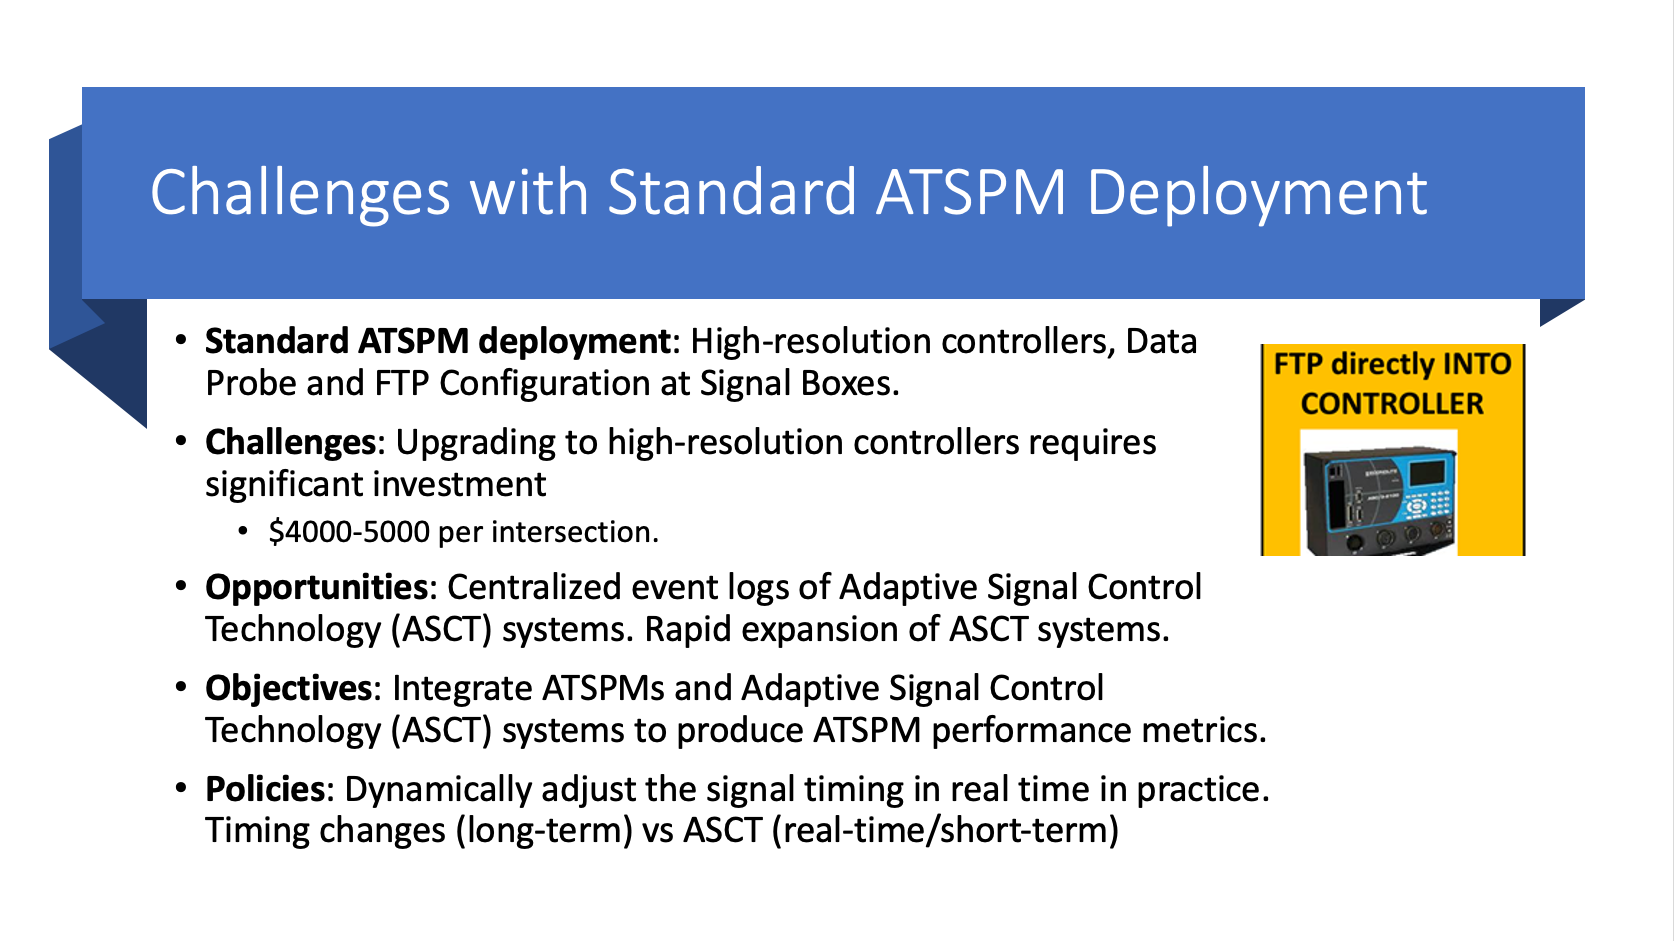 Slide Reads Challenges with Standard ATSPM Deployment, Standard ATSPm Deployment: High-resolution controllers, data probe and FTP configuration at Signal Boxes. Challenges: Upgrading to high-resolution controllers requires significant investment, $4,000 to $5,000 dollars per intersection. Opportunities: Centralized event logs of Adaptive Signal Control Technology systems. Rapid expansion of ASCT systems. Objectives: Integrate ATSPMs and Adaptive Signal Control Technology )ASCT) systems to produce ATSPM performance metrics. Policies: Dynamically adjust the signal timing in real time in practice. Timing changes (long-term) versus ASCT (real-time/short-term).